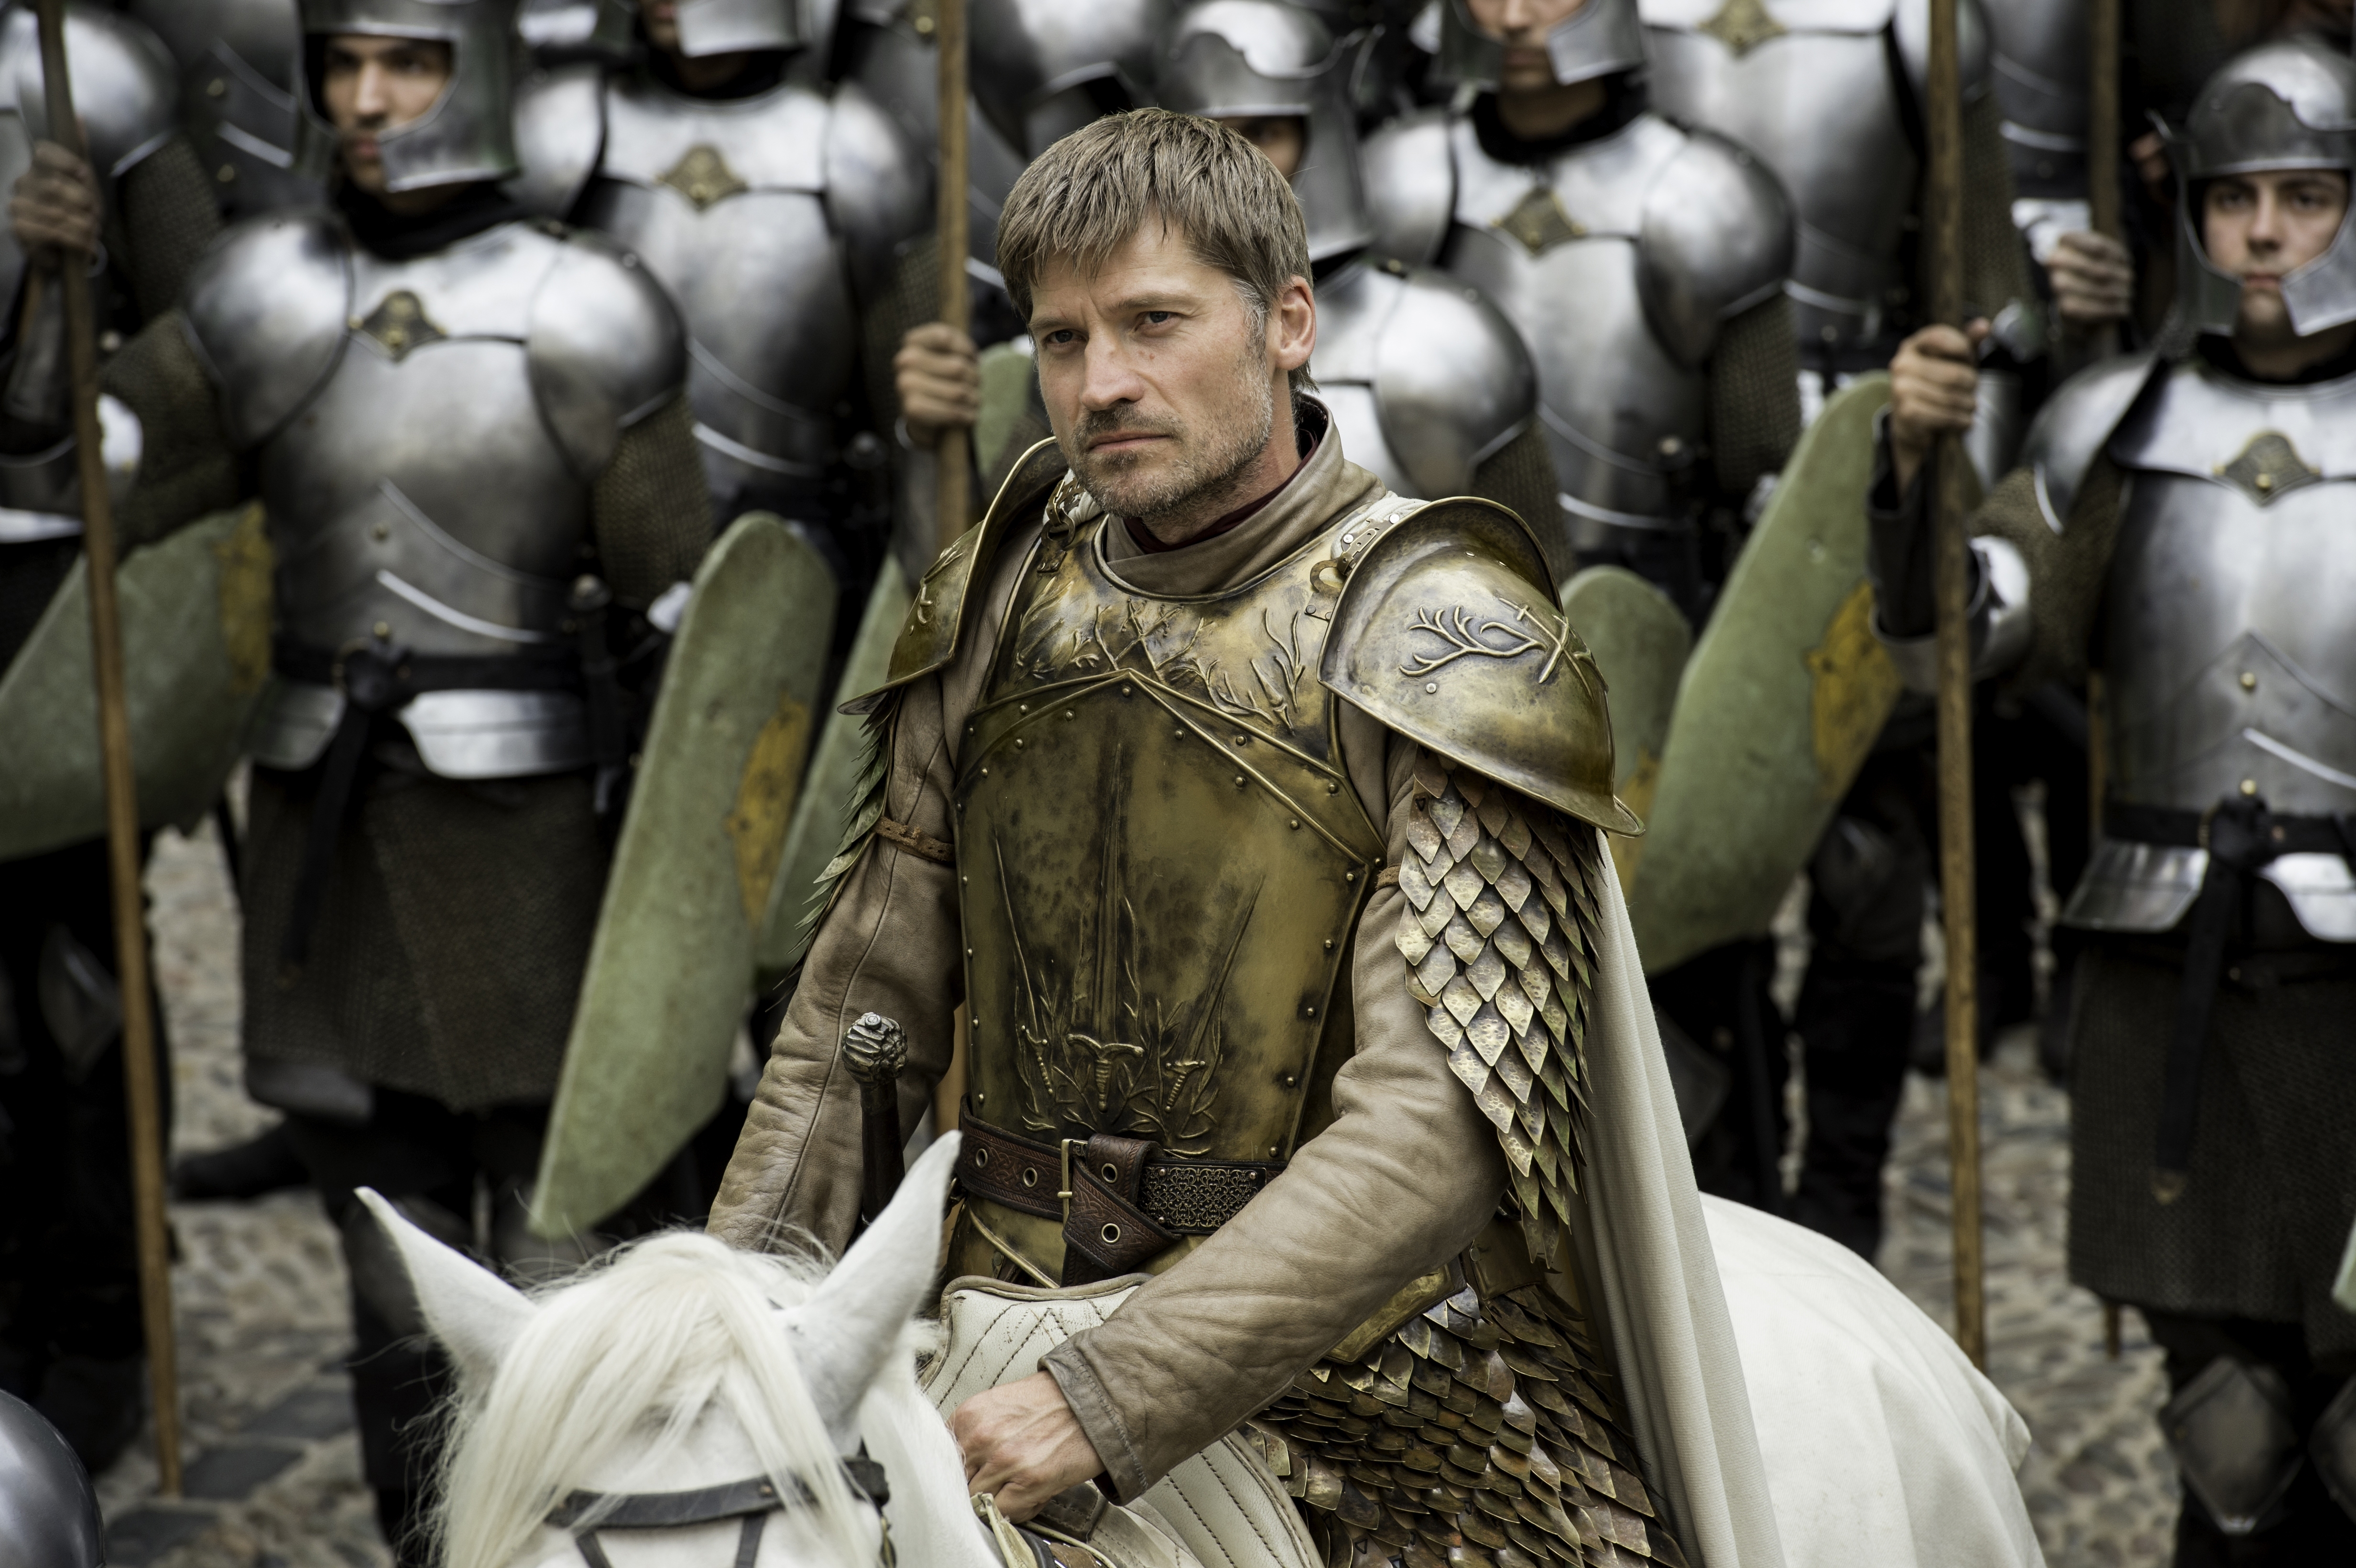 Jaime Lannister lost millions after Game of Thrones, and what about his career?